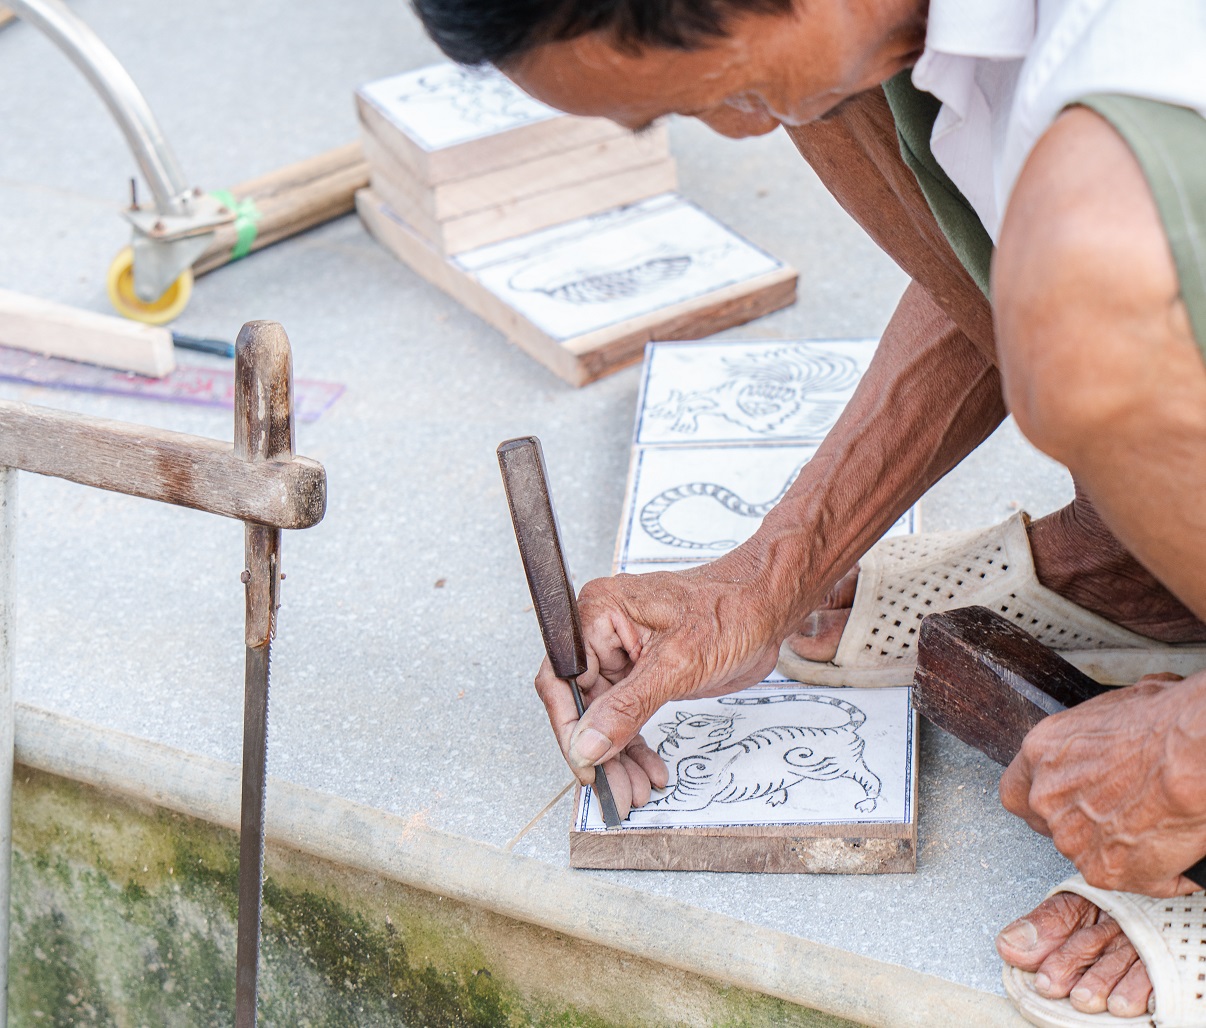 Artisan Phuoc creates a woodblock, using simple tools. He said the job requires artisans to be skillful to create woodblocks which can be handed down to future generations. Photo: Nguyen Trung Au / Tuoi Tre News